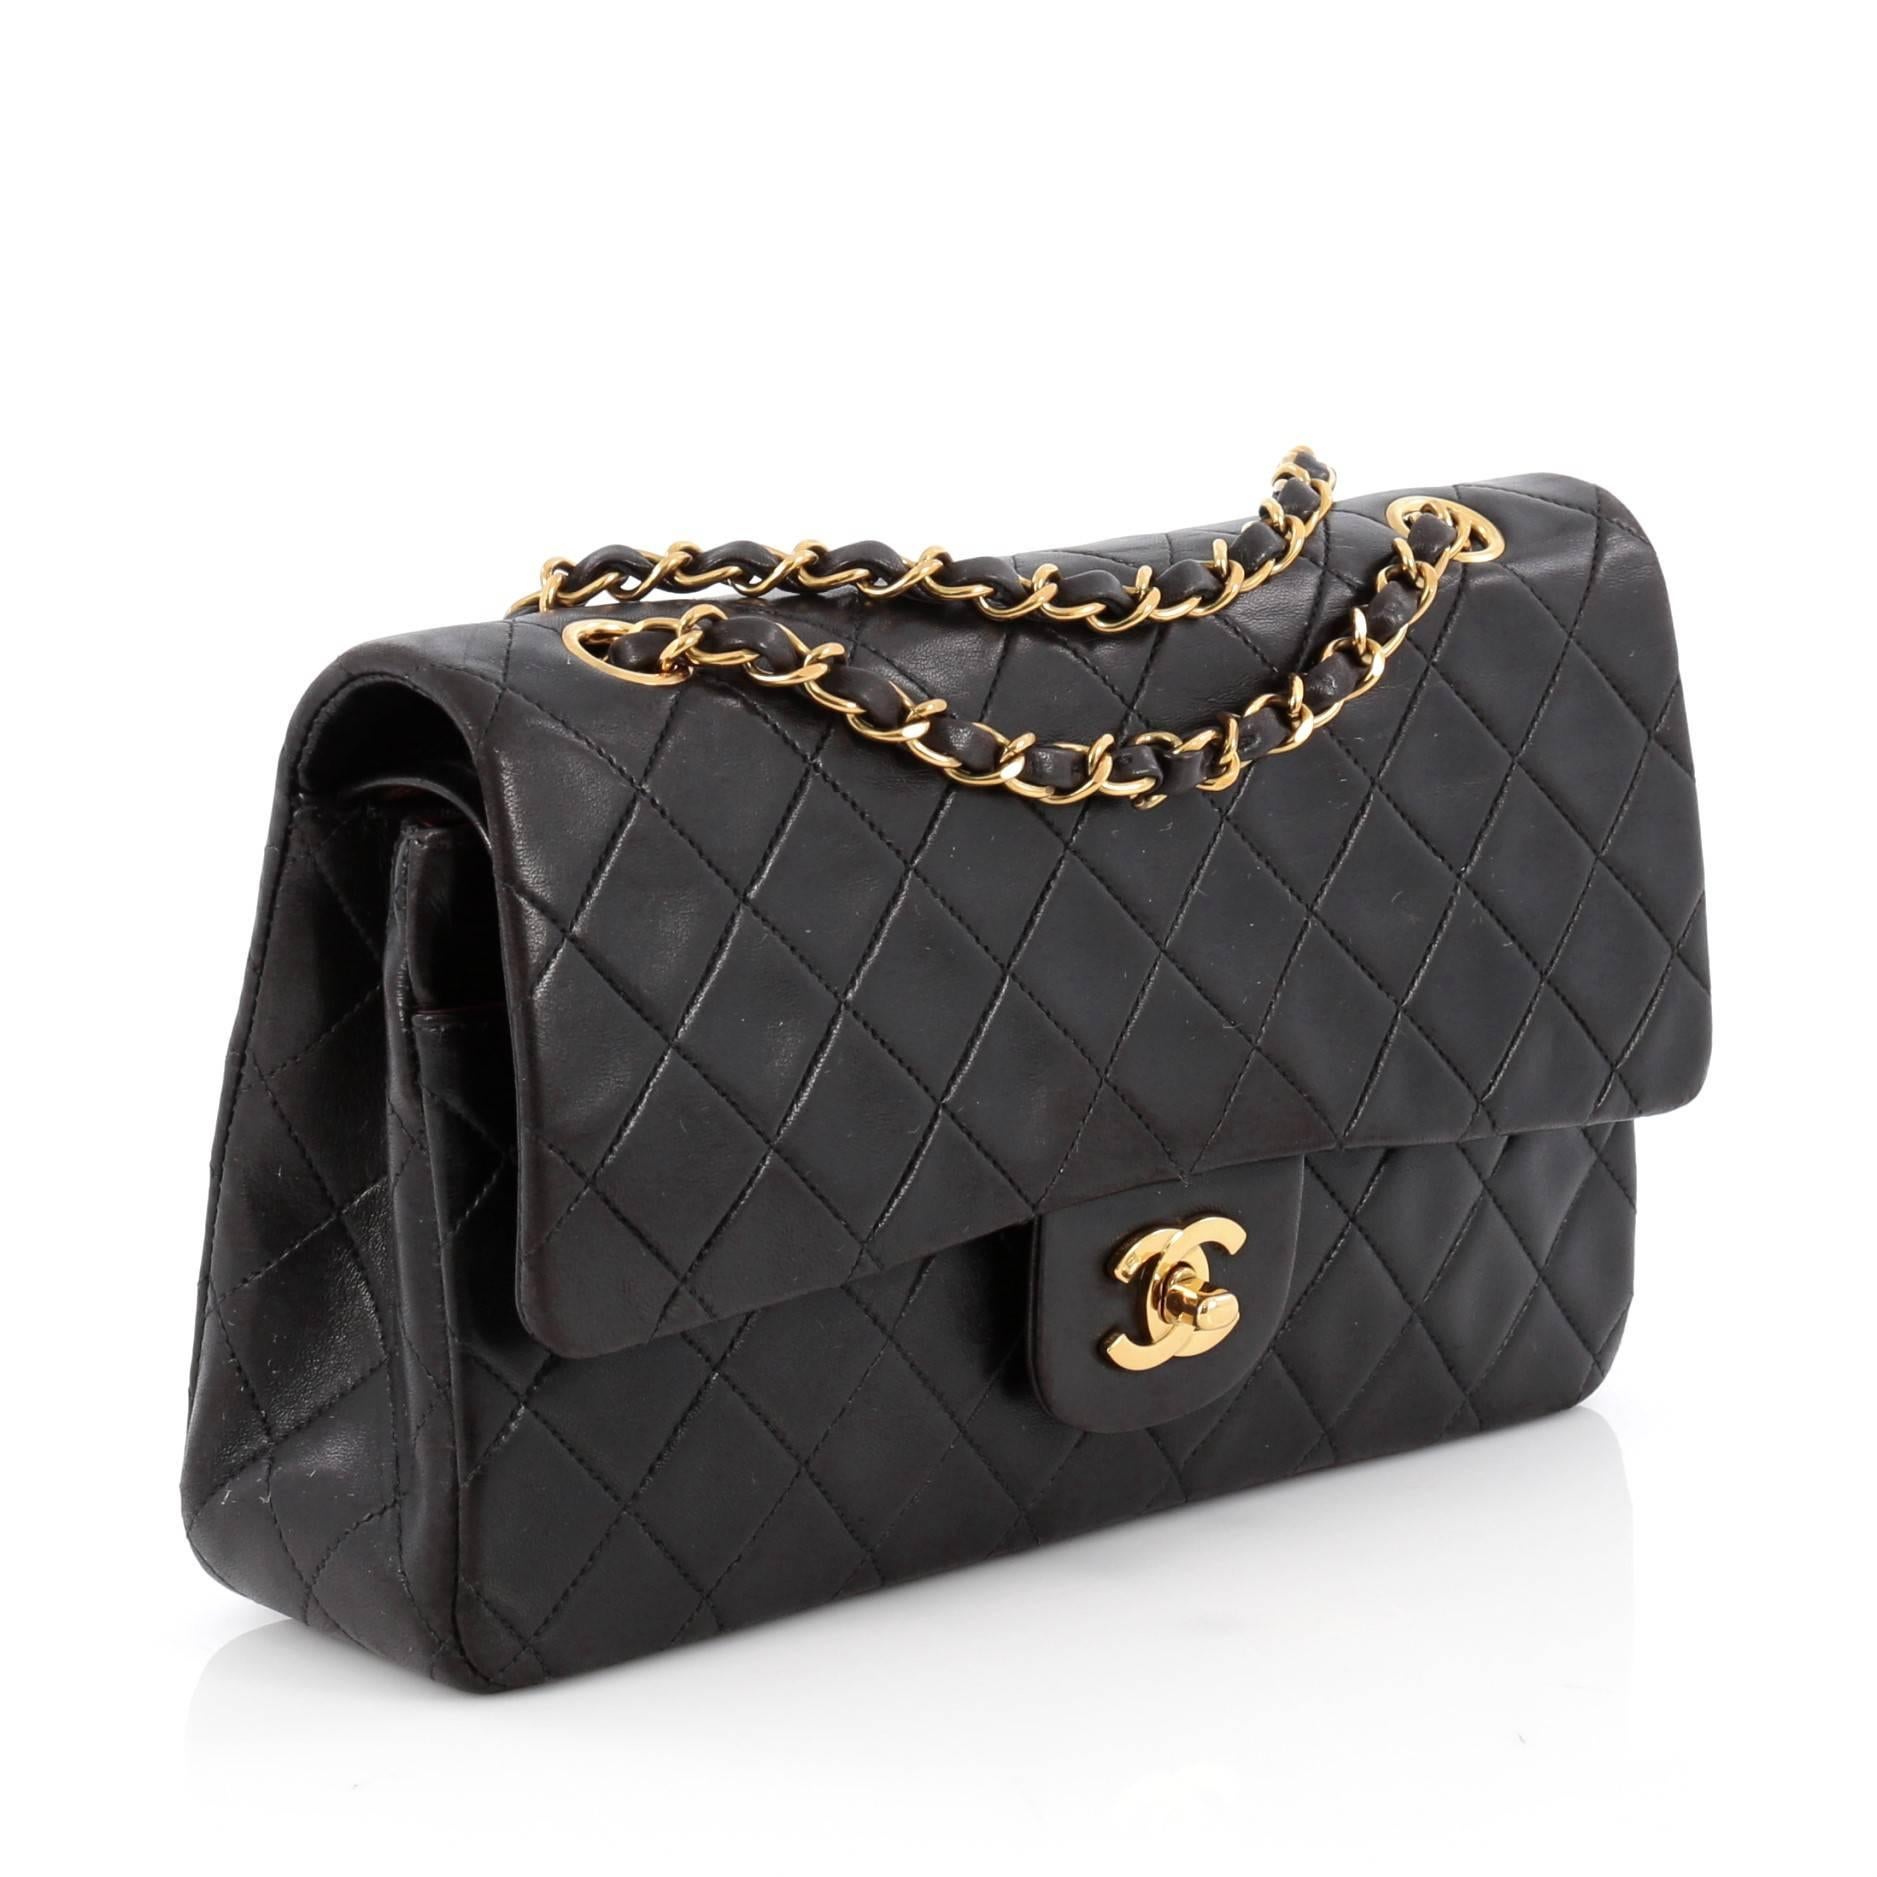 Black Chanel  Vintage Classic Double Flap Bag Quilted Lambskin Medium